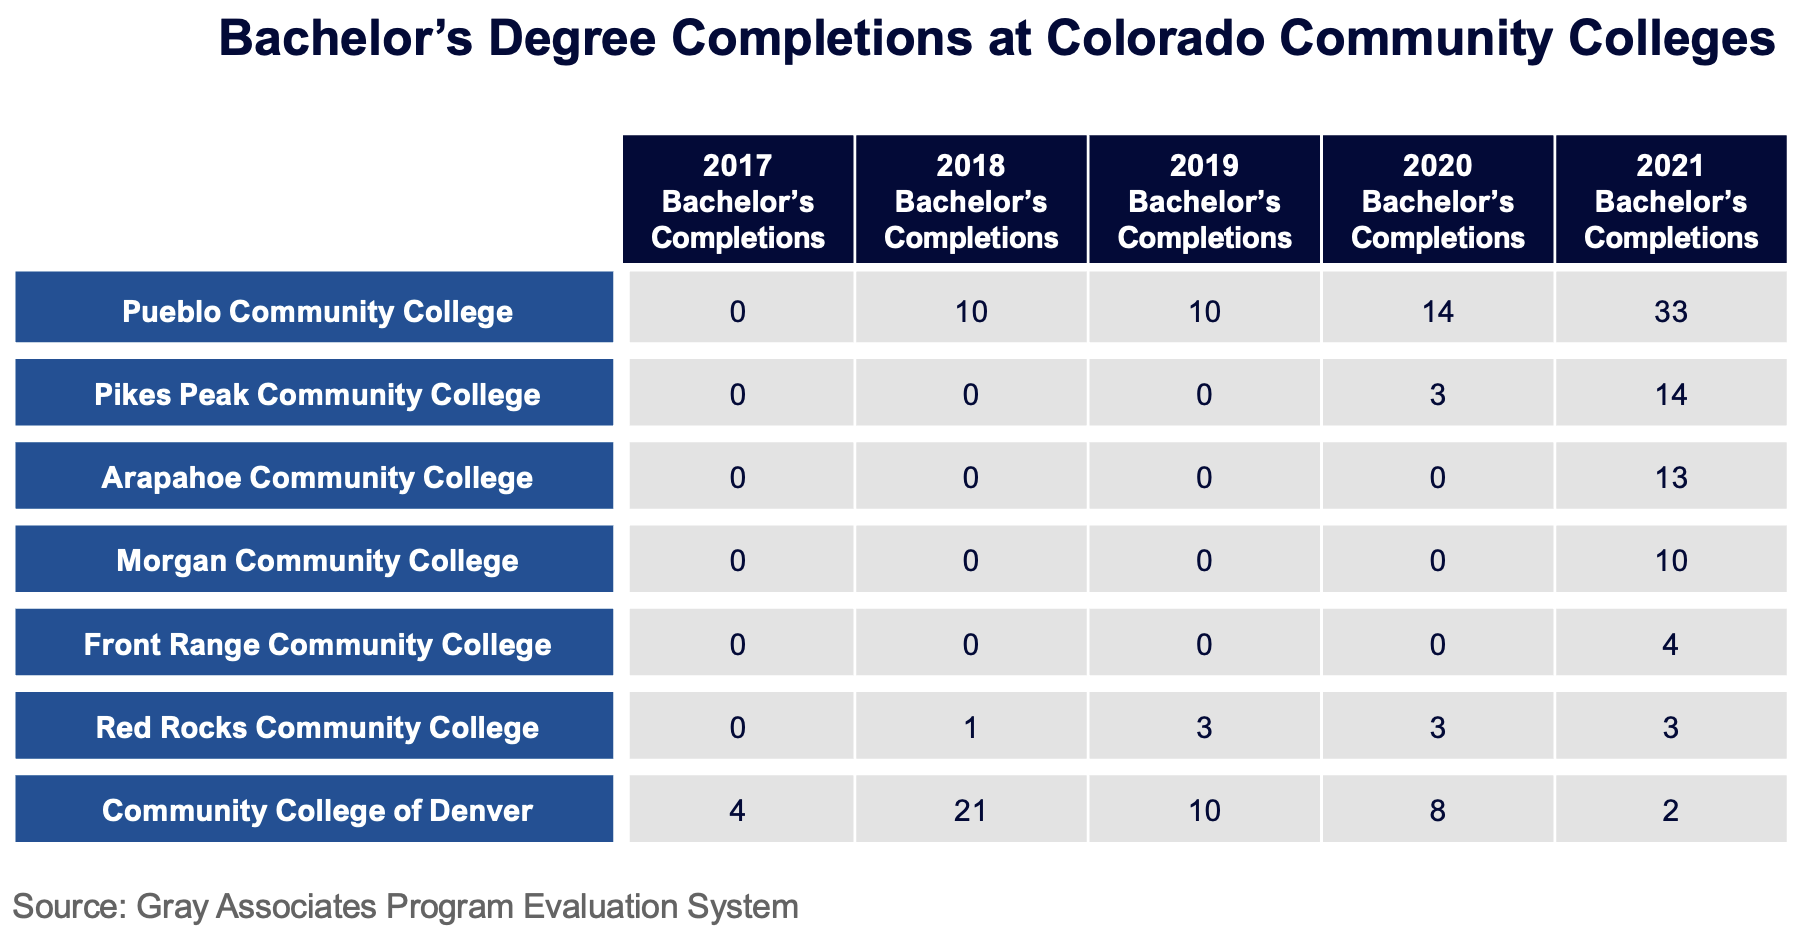 Bachelor's Degree completions at Colorado Community Colleges